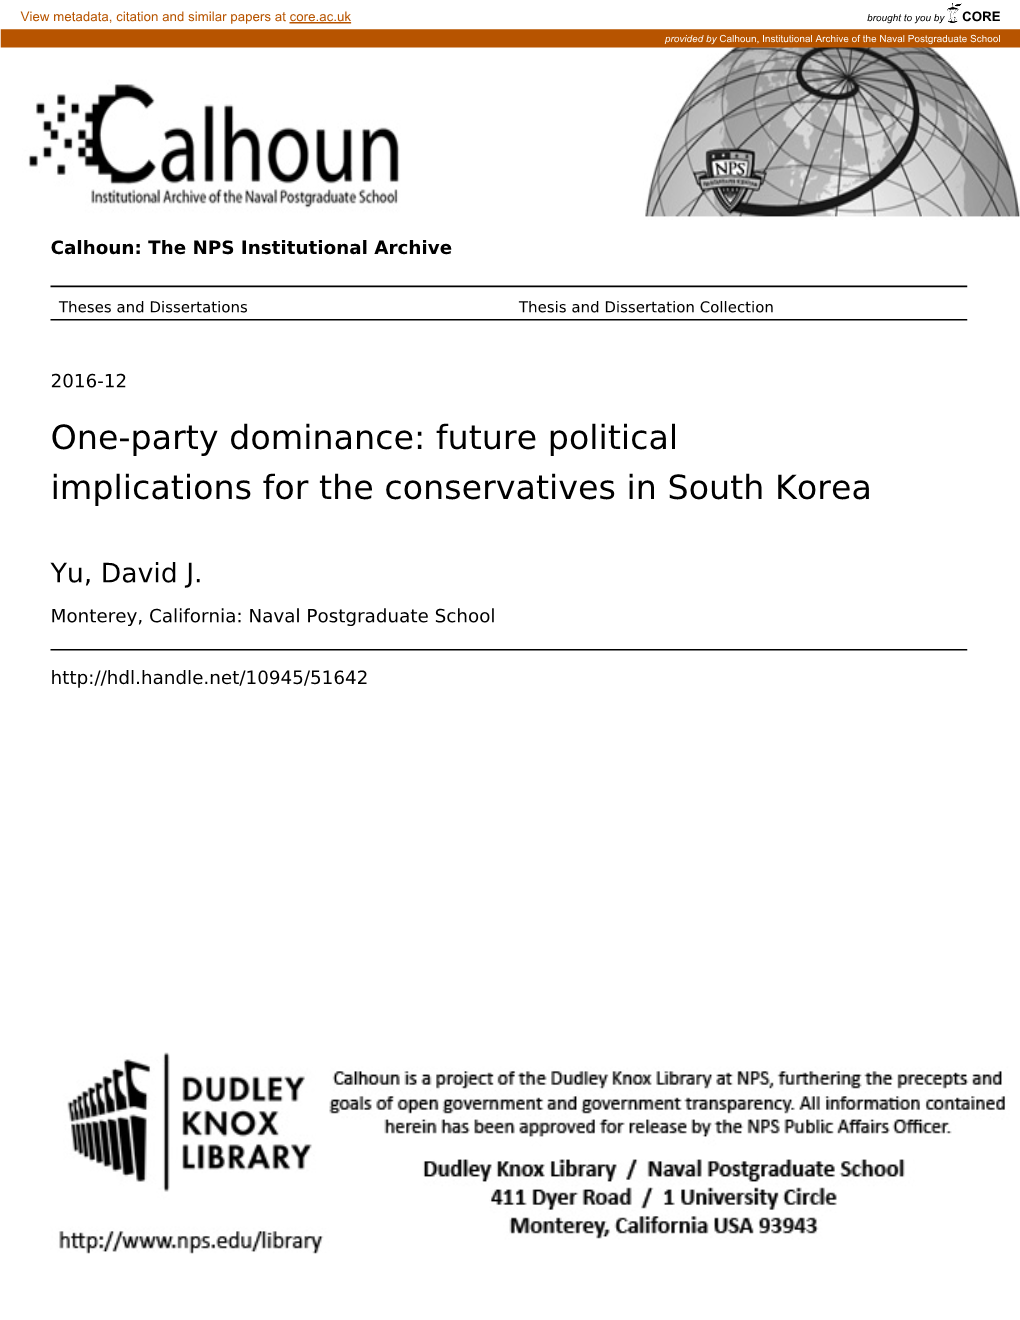 Future Political Implications for the Conservatives in South Korea